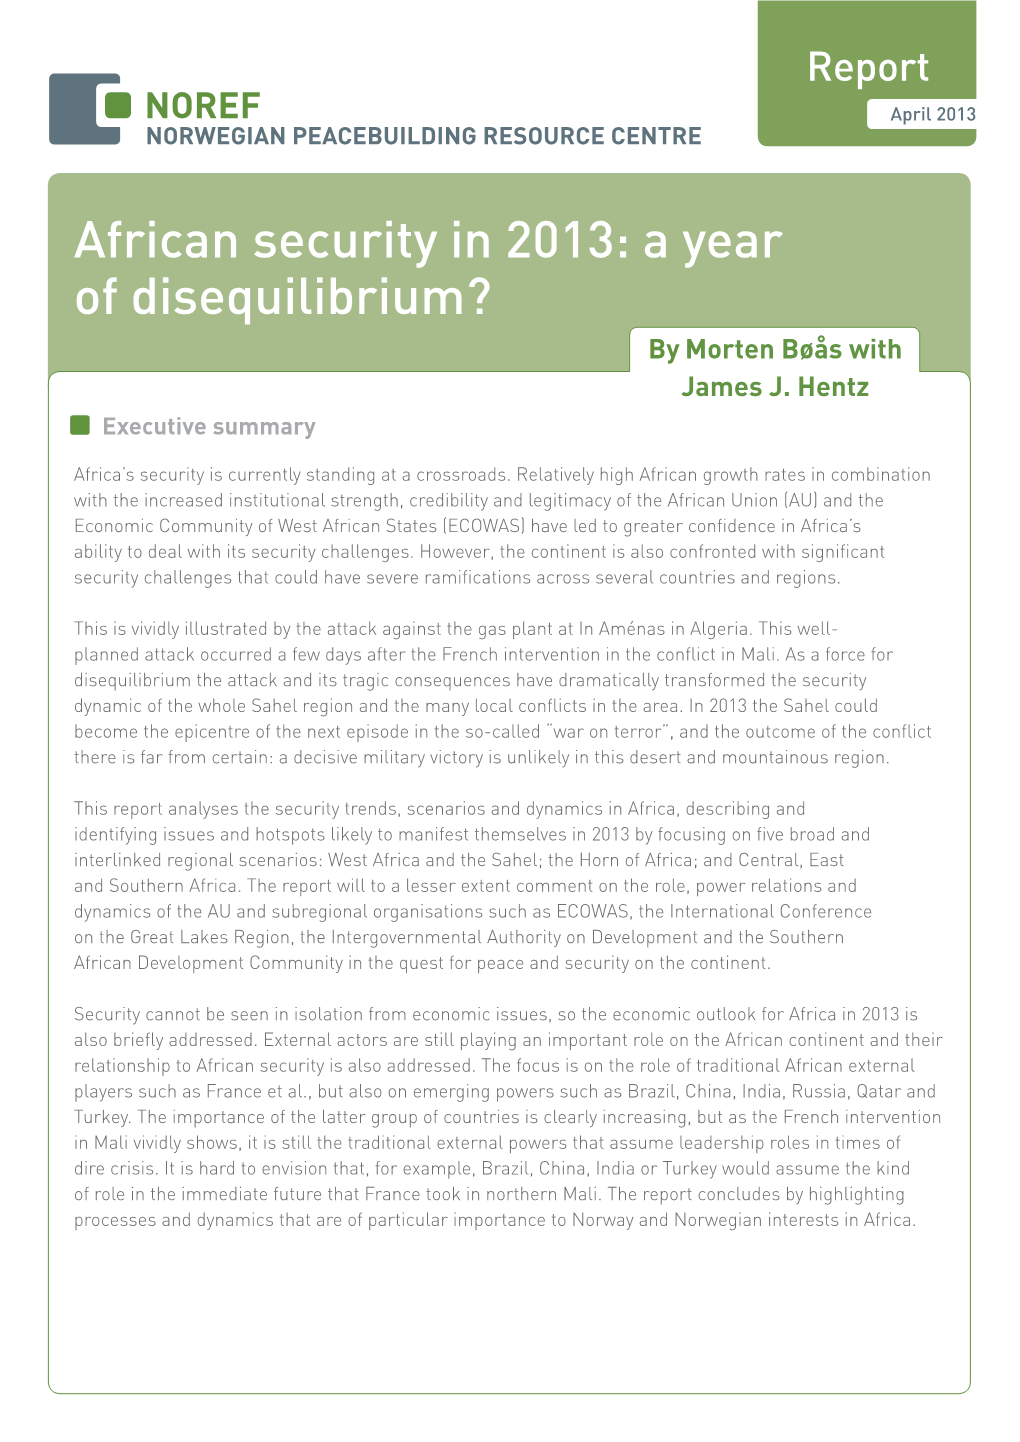 African Security in 2013: a Year of Disequilibrium? by Morten Bøås with James J